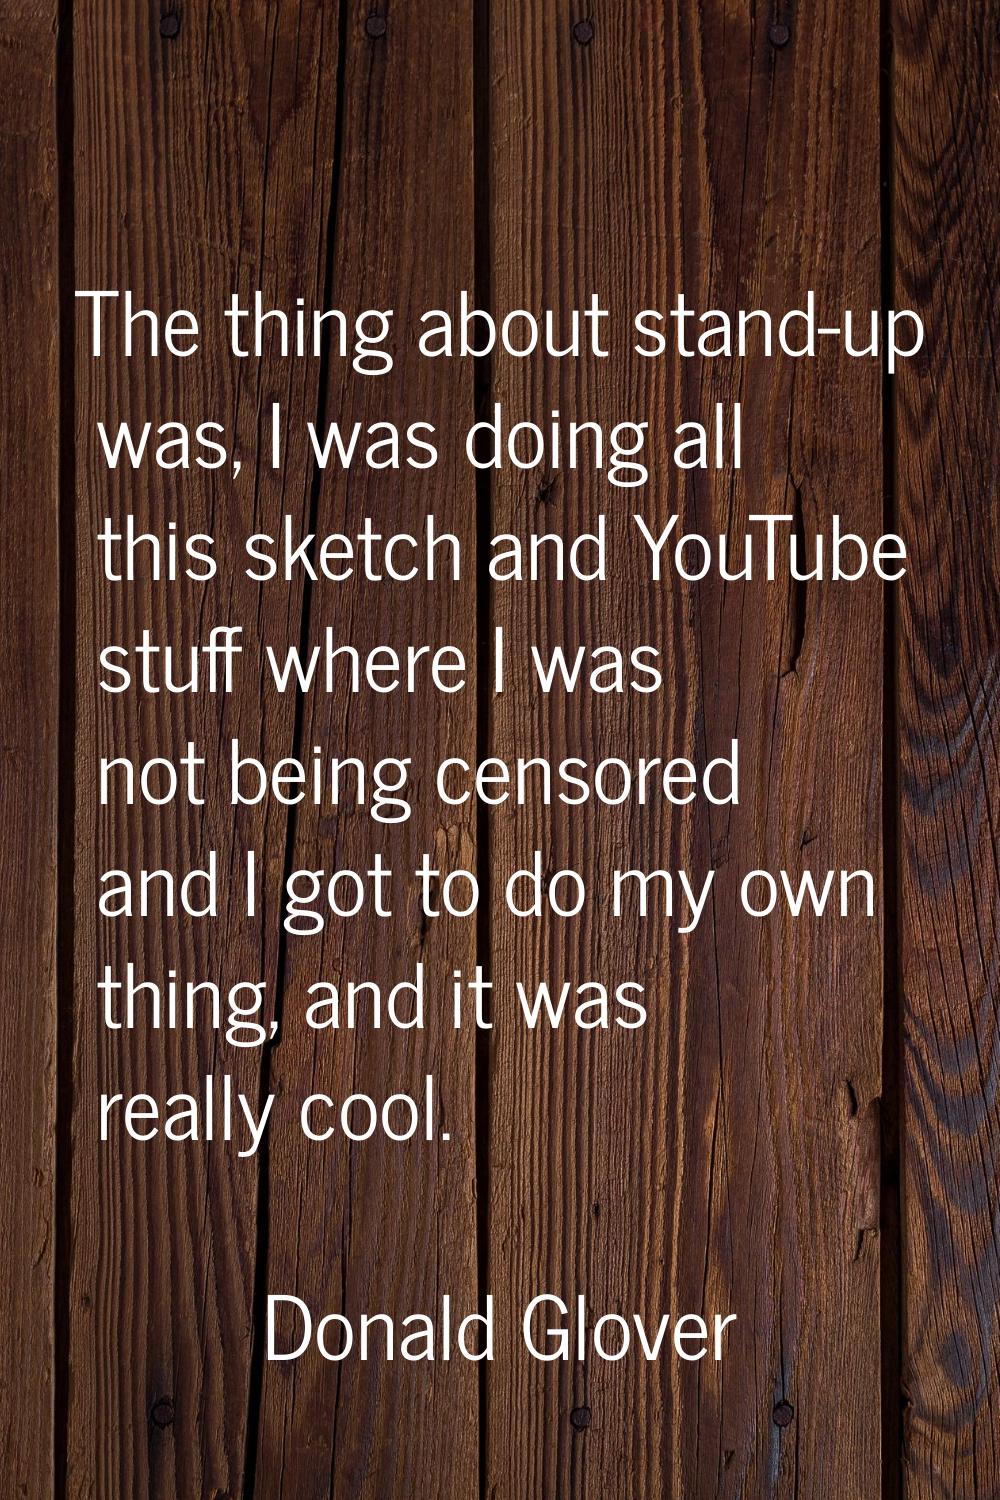 The thing about stand-up was, I was doing all this sketch and YouTube stuff where I was not being c